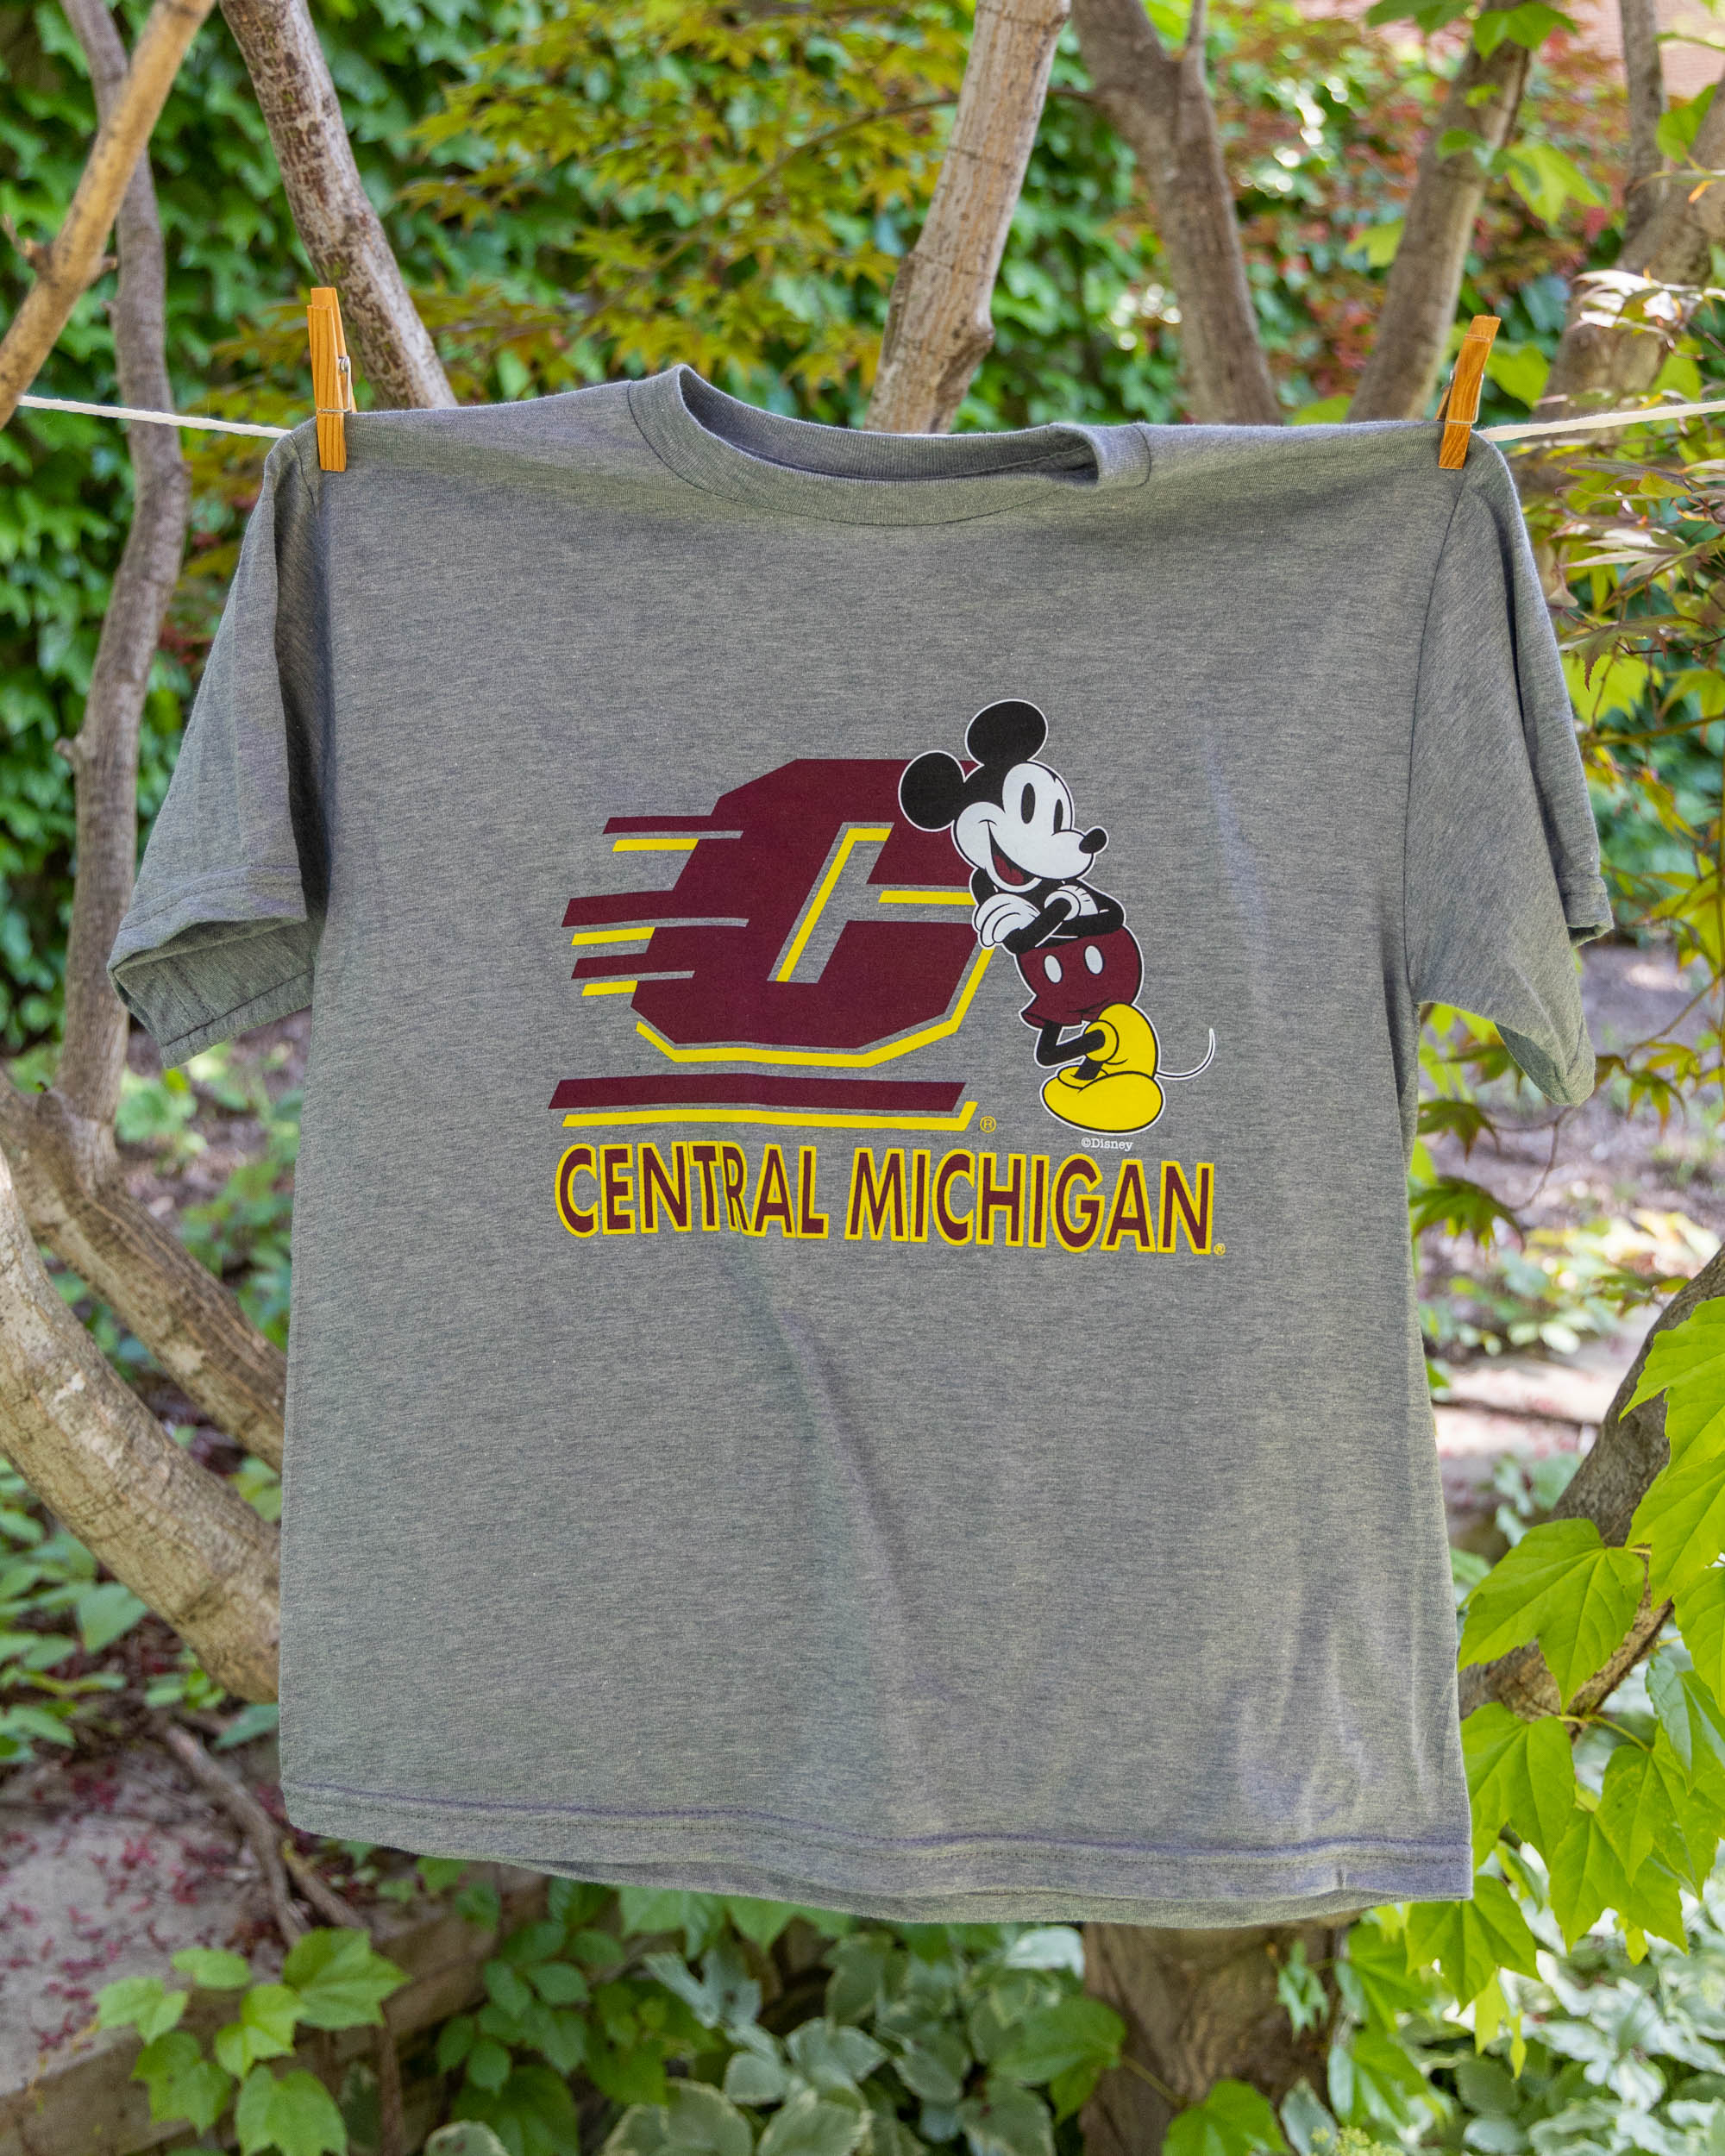 Action C Central Michigan Mickey Mouse Youth Gray T-Shirt<br><brand>BLUE 84</brand> (SKU 5054070998)